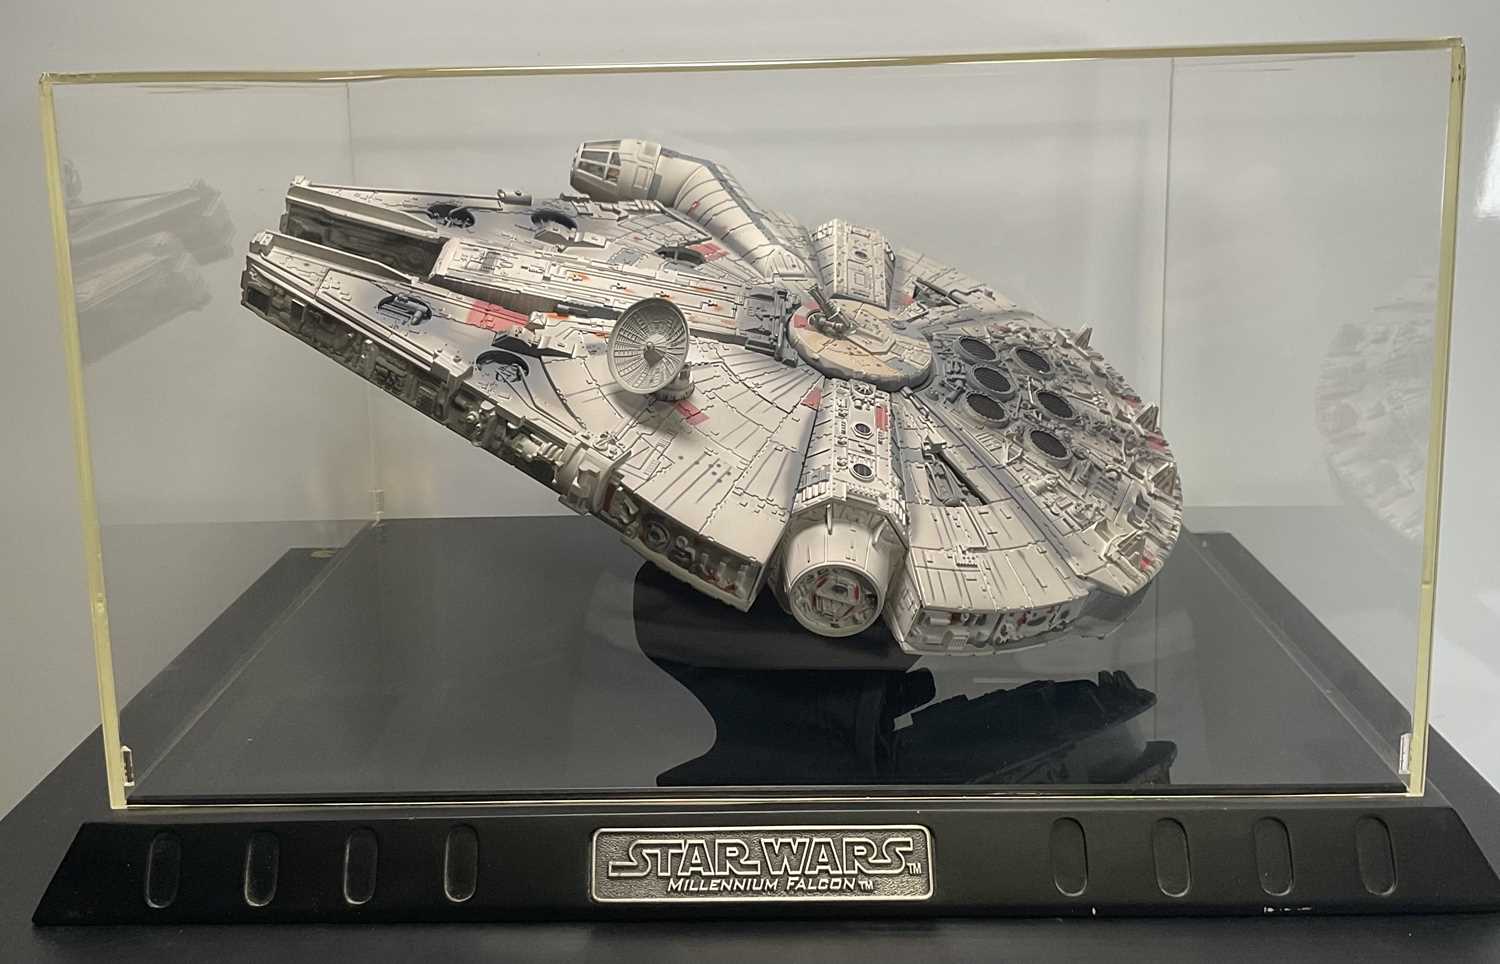 STAR WARS - A Code 3 Die Cast, hand-painted replica of the Millennium Falcon scale, limited - Image 2 of 12